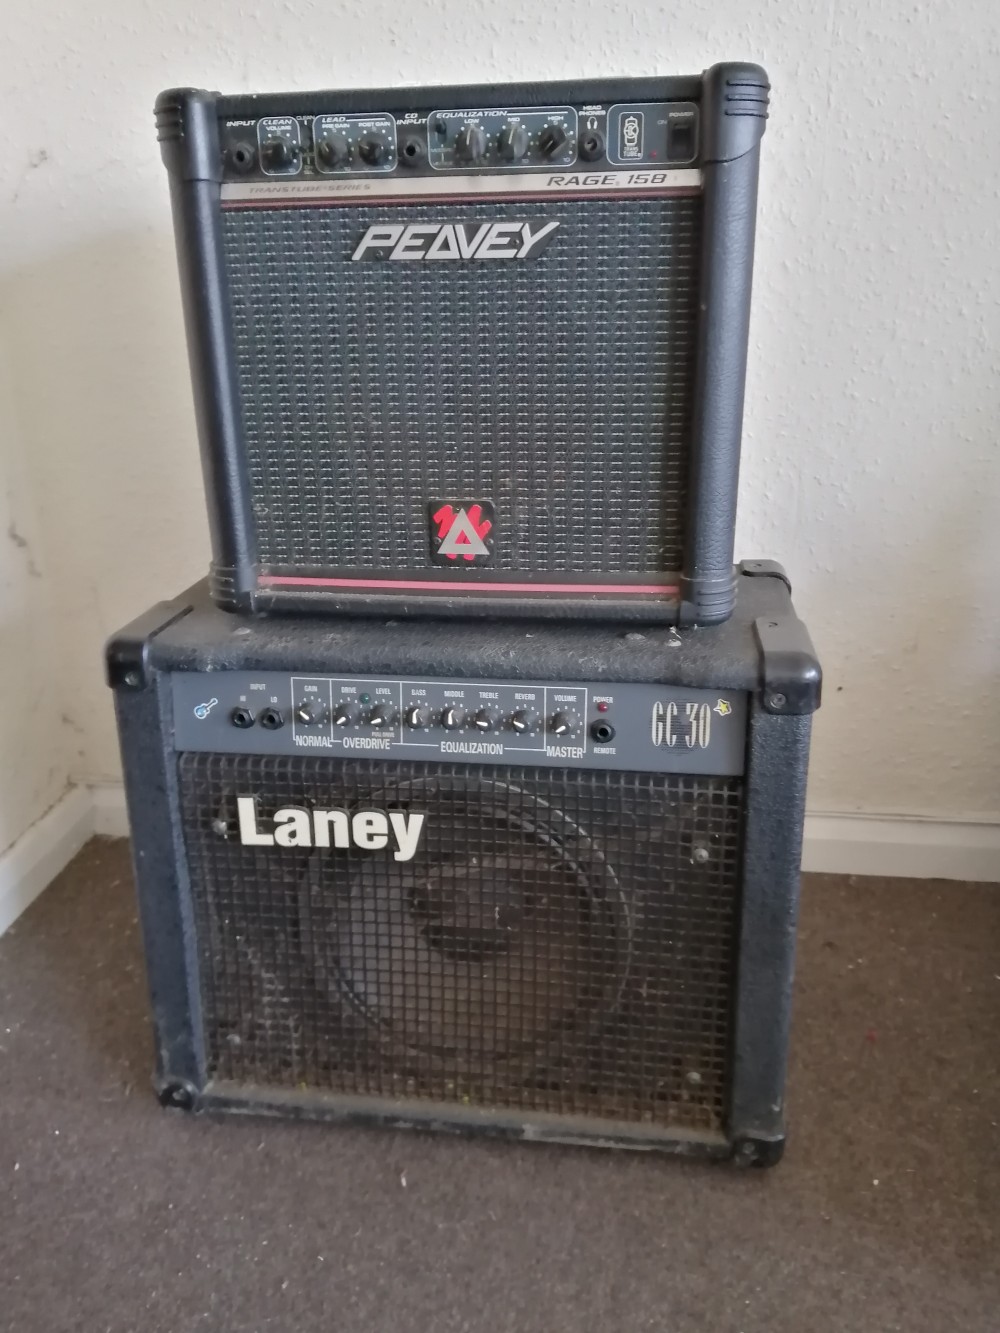 A Peavey Rage 158, Transtube Series guitar amp and a Laney GC30 guitar amp